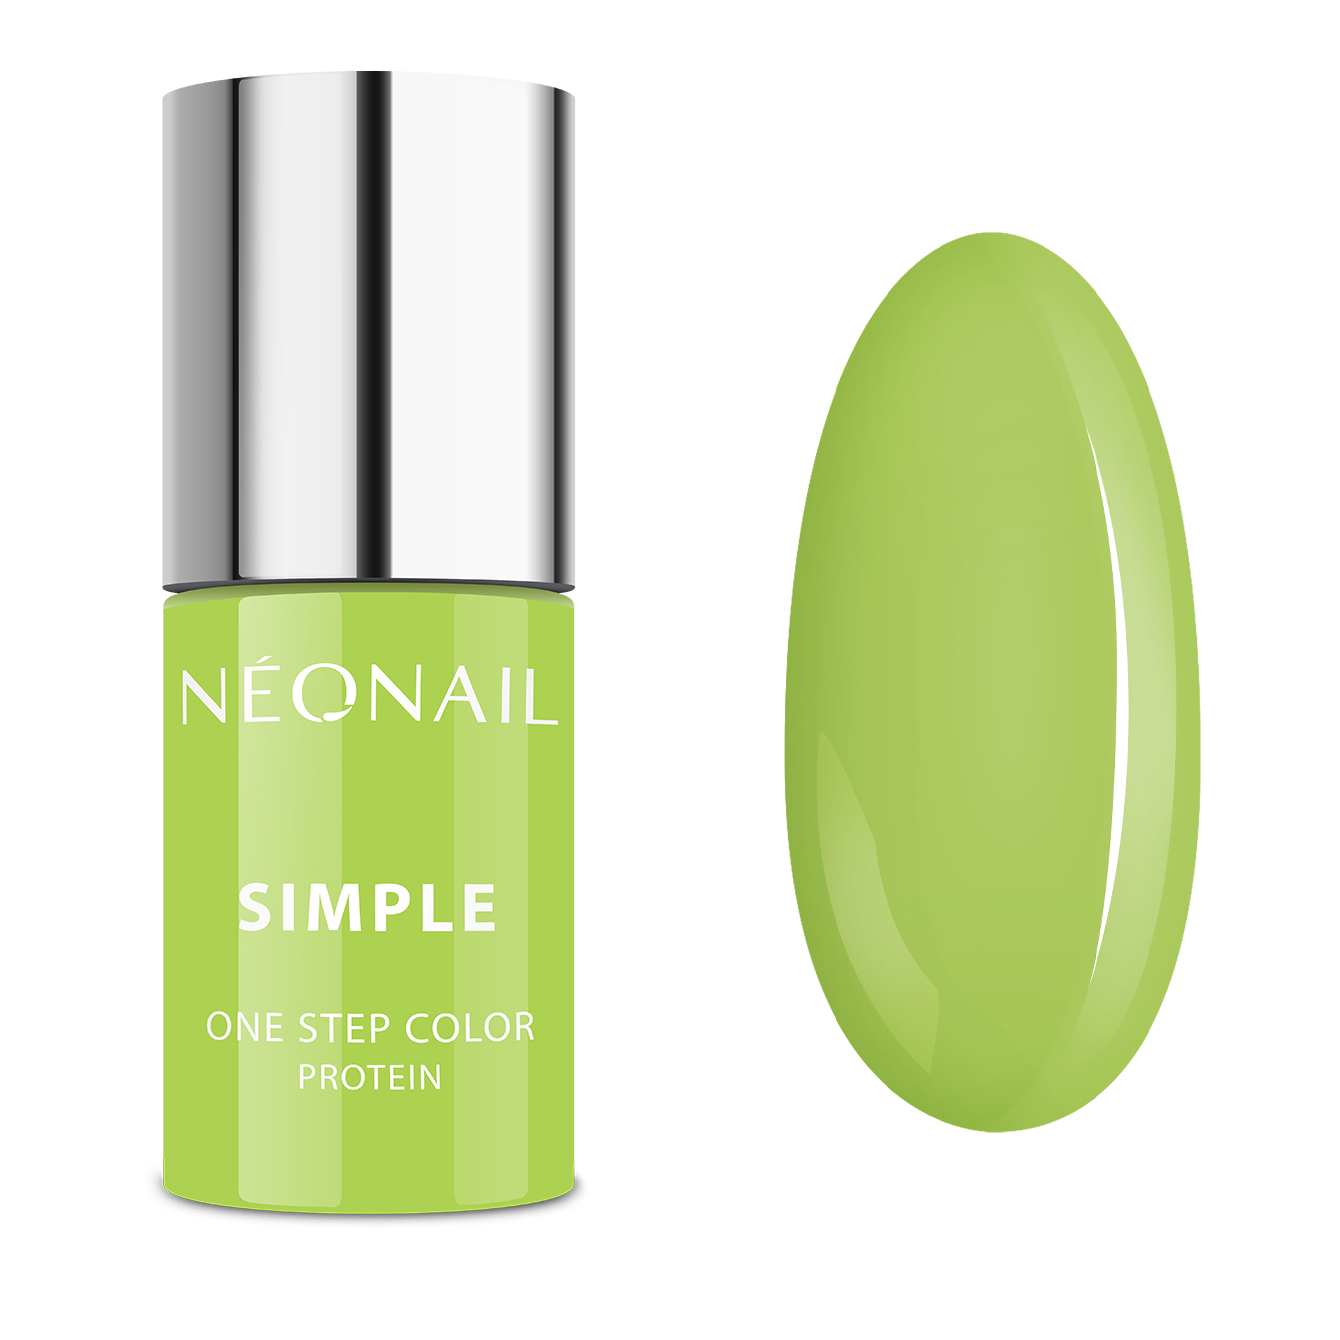 NeoNail Simple One Step - Smiley 7,2 g